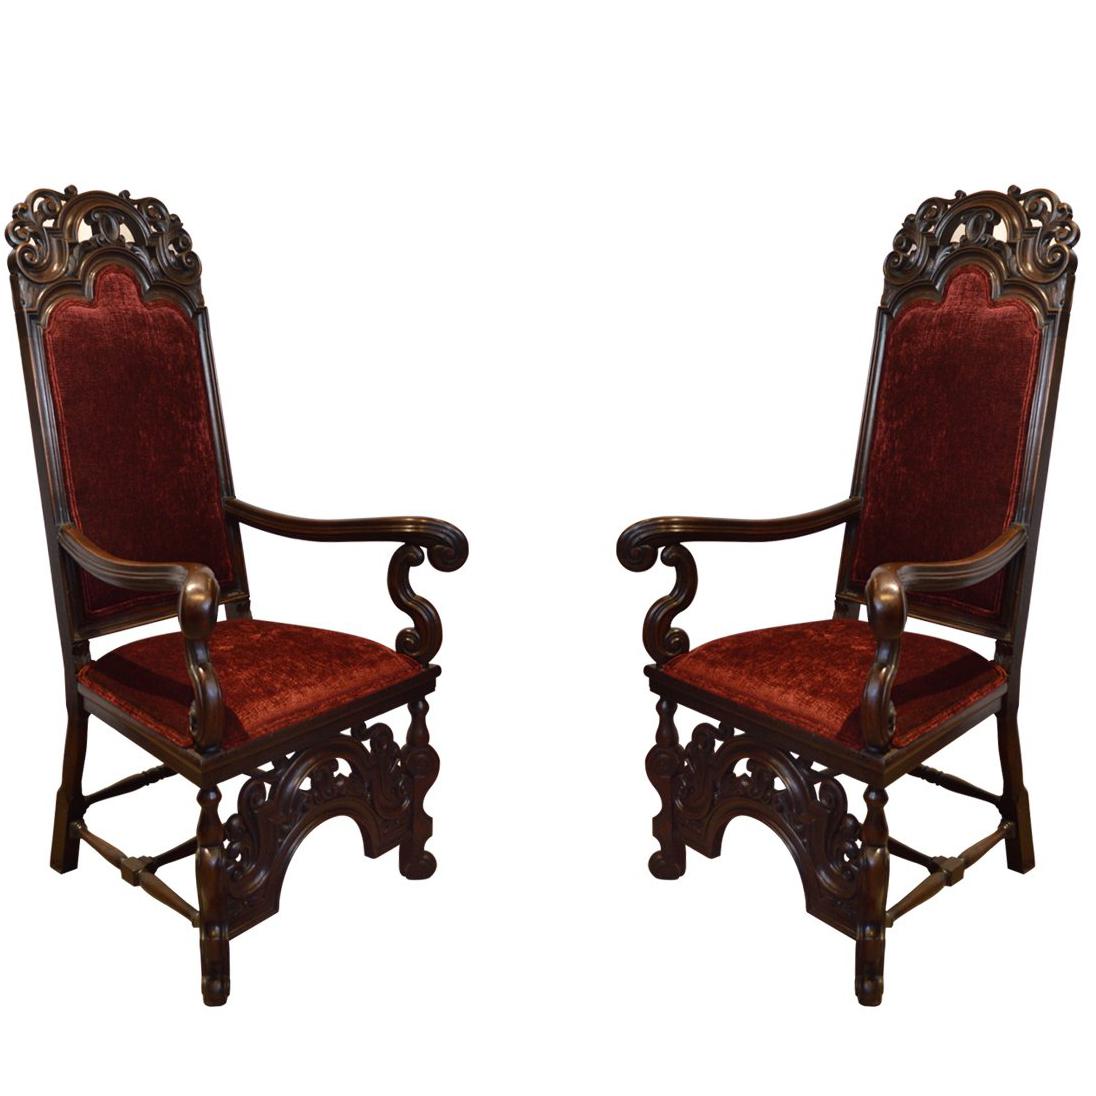 Pair of French Antique, 19th Century Hand-Carved Walnut High Back Chairs For Sale